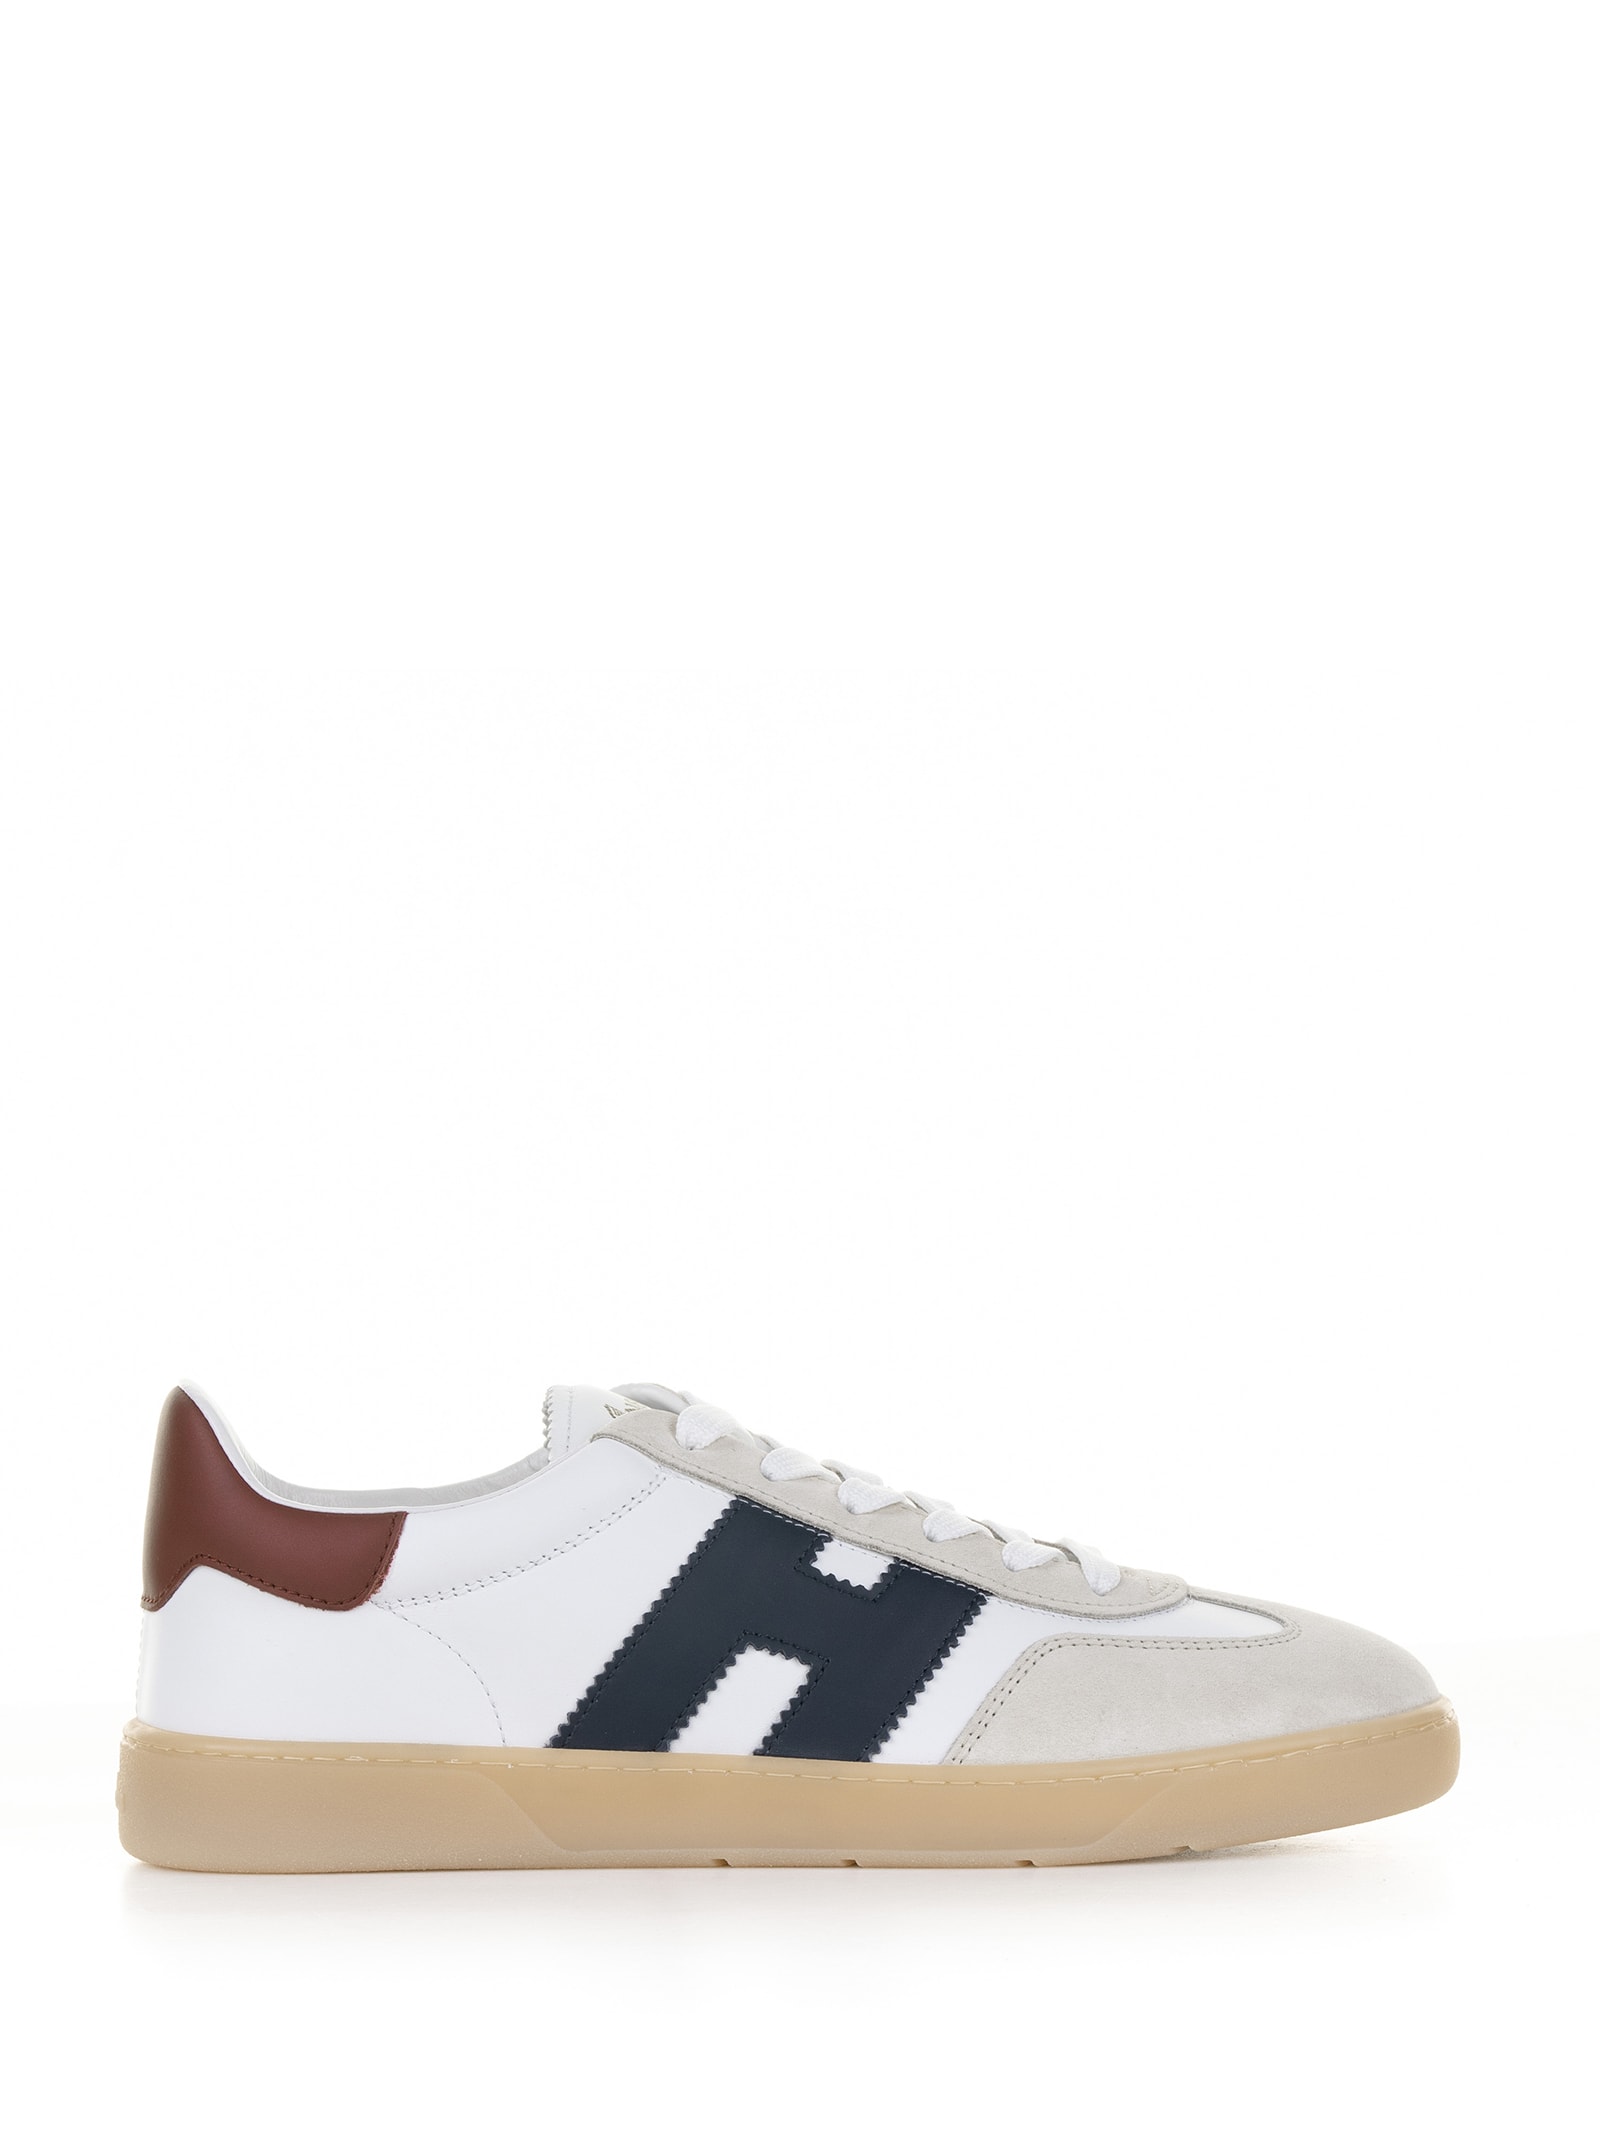 Hogan Cool Sneakers In Leather And Suede In Bianco Blu Rosso